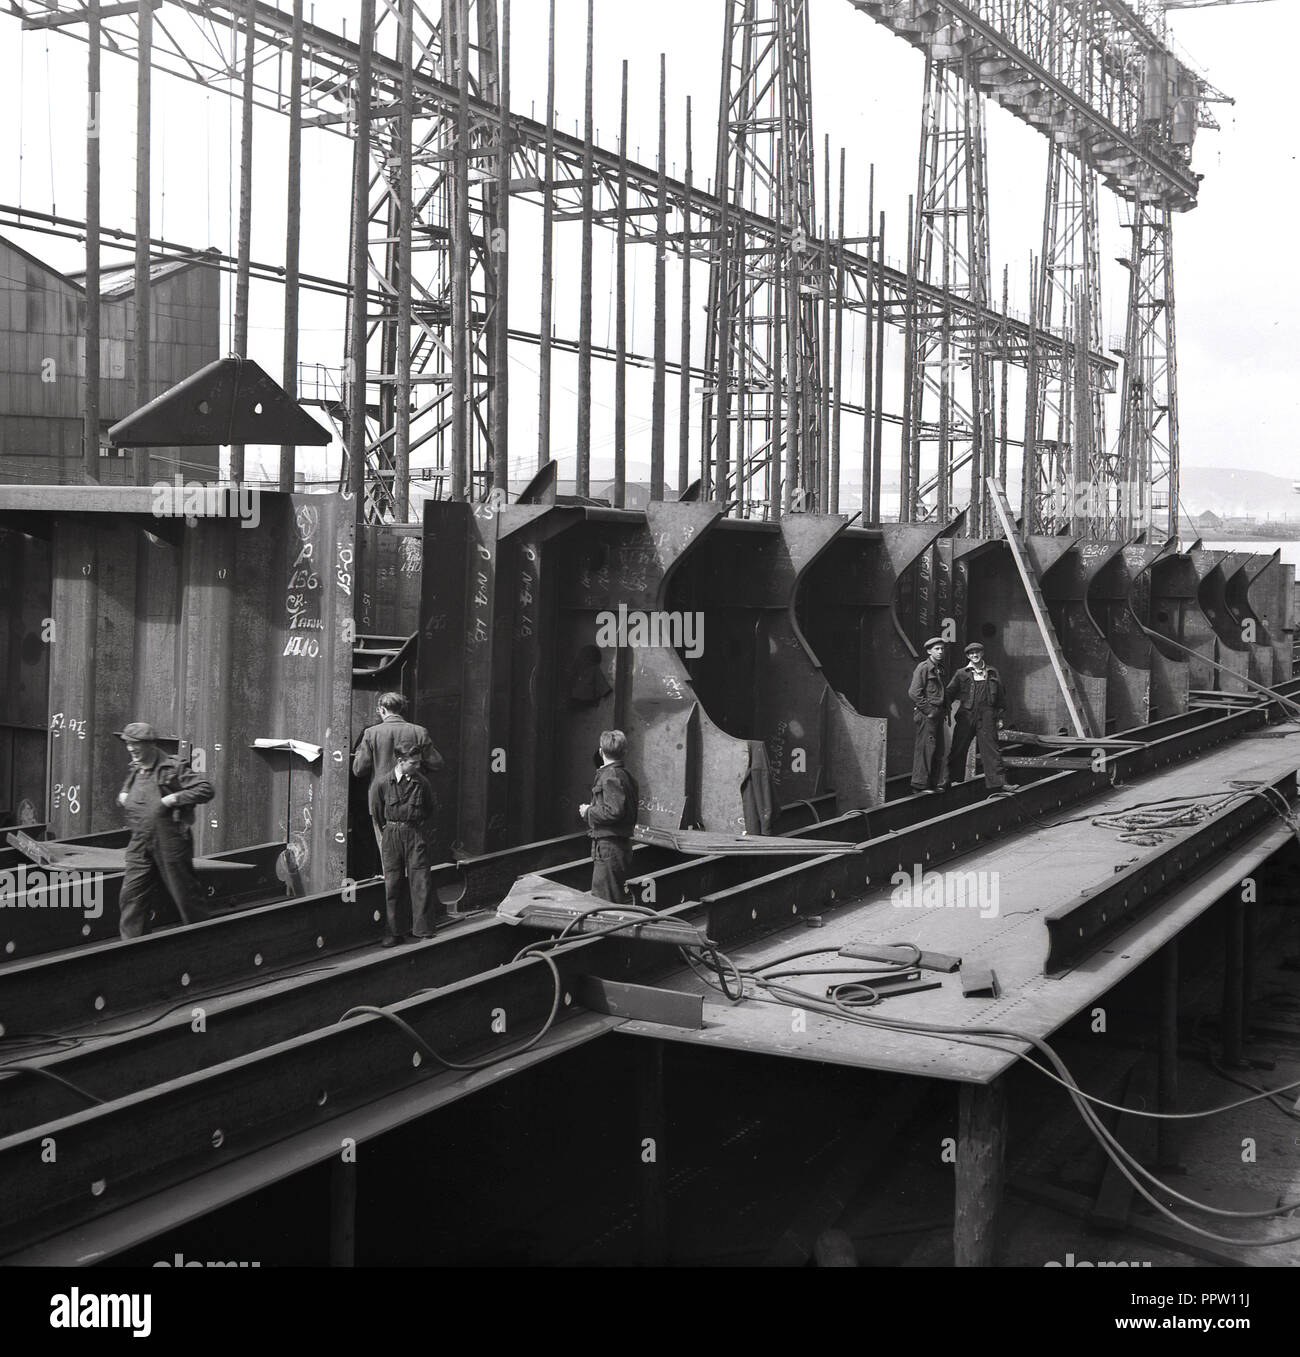 1950s, historical, workers at the shipyard of Harland and Wolff shipbuilders in Belfast, Northern Ireland, UK. The yard on Queen's Island, River Lagan with its giant gantries, was busy during WW2 and in the years following and remained a major shipbuilding centre until the early 1960s, when overseas competition from the far east and the rise of jet-powered aircraft saw the yard's orders decline. Stock Photo